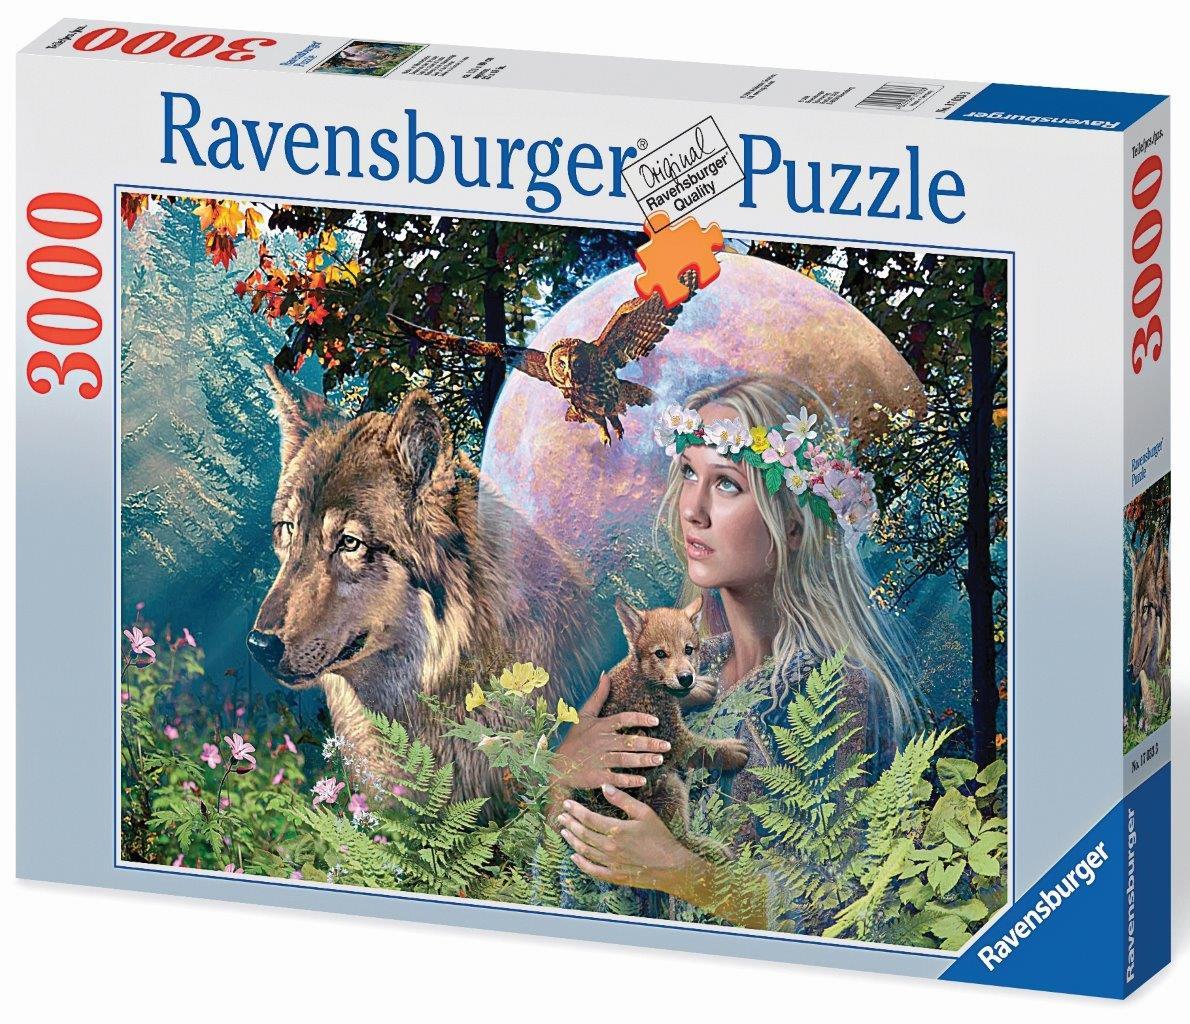 Lady Of The Forest Puzzle 3000pc (Ravensburger Puzzle)